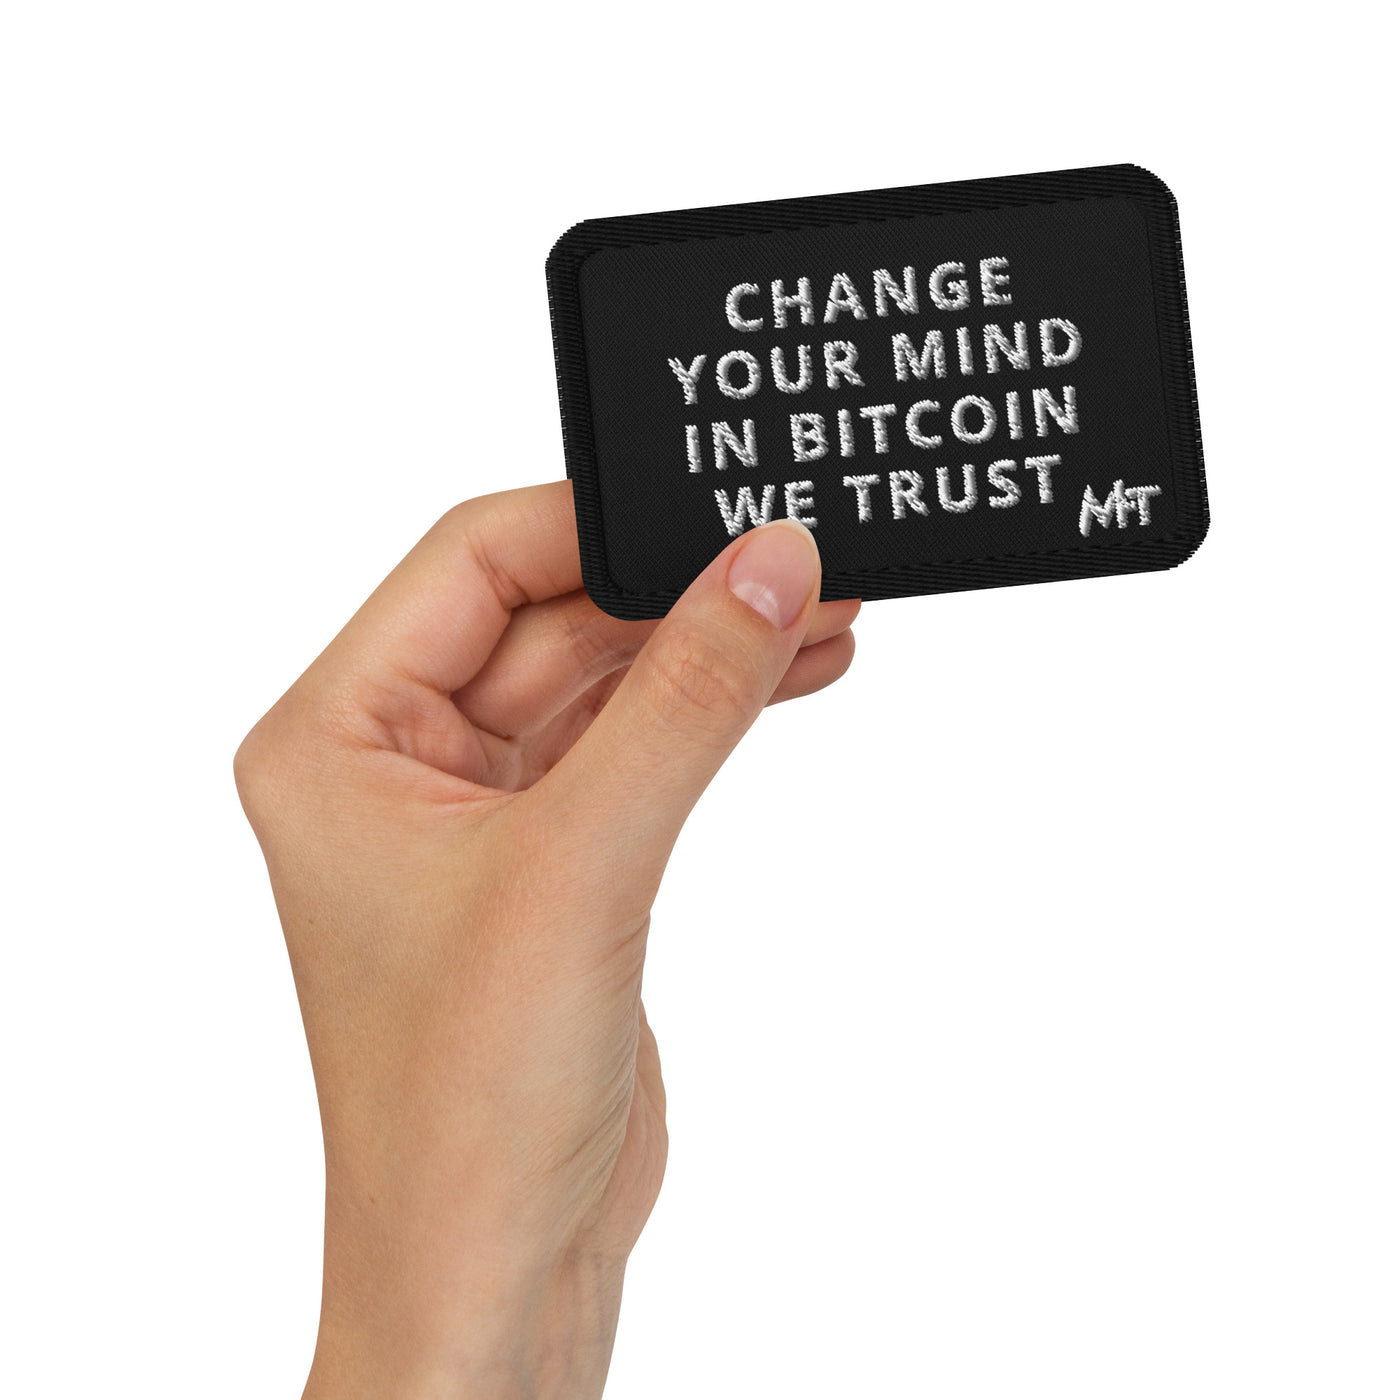 Change your mind in Bitcoin we Trust - Embroidered patches